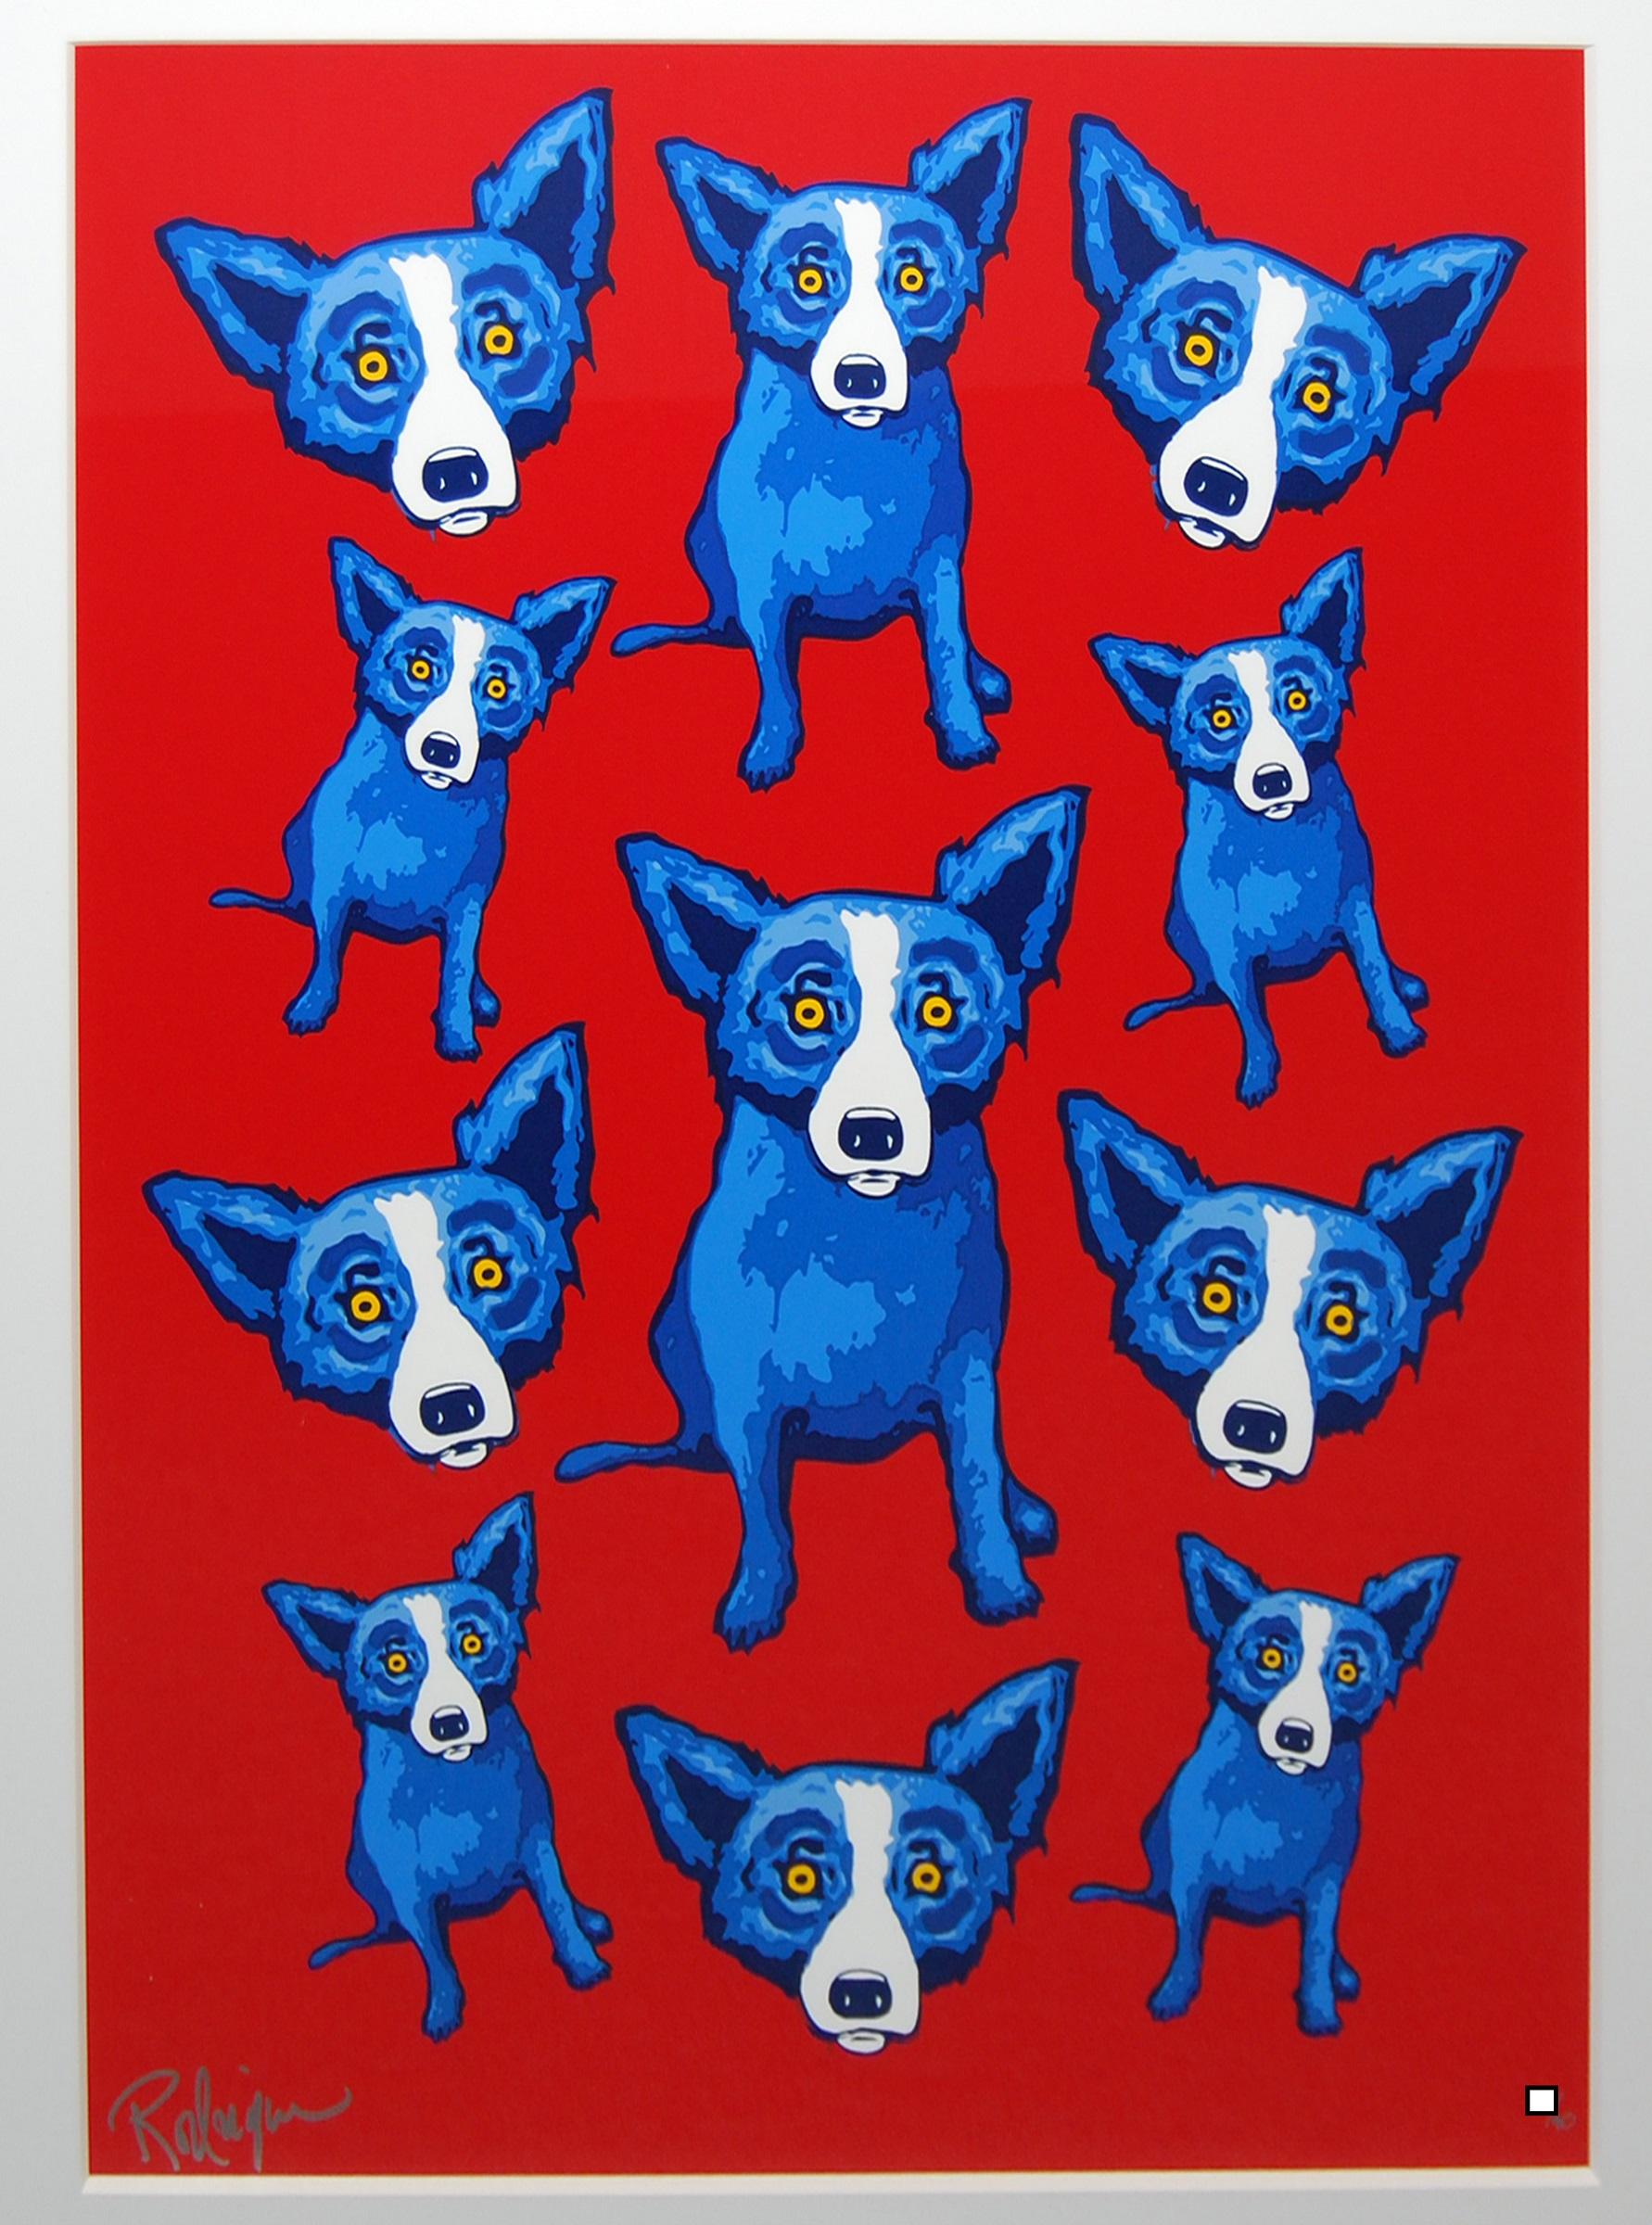 George Rodrigue Animal Print - Group Therapy Red - Signed Silkscreen Blue Dog Print